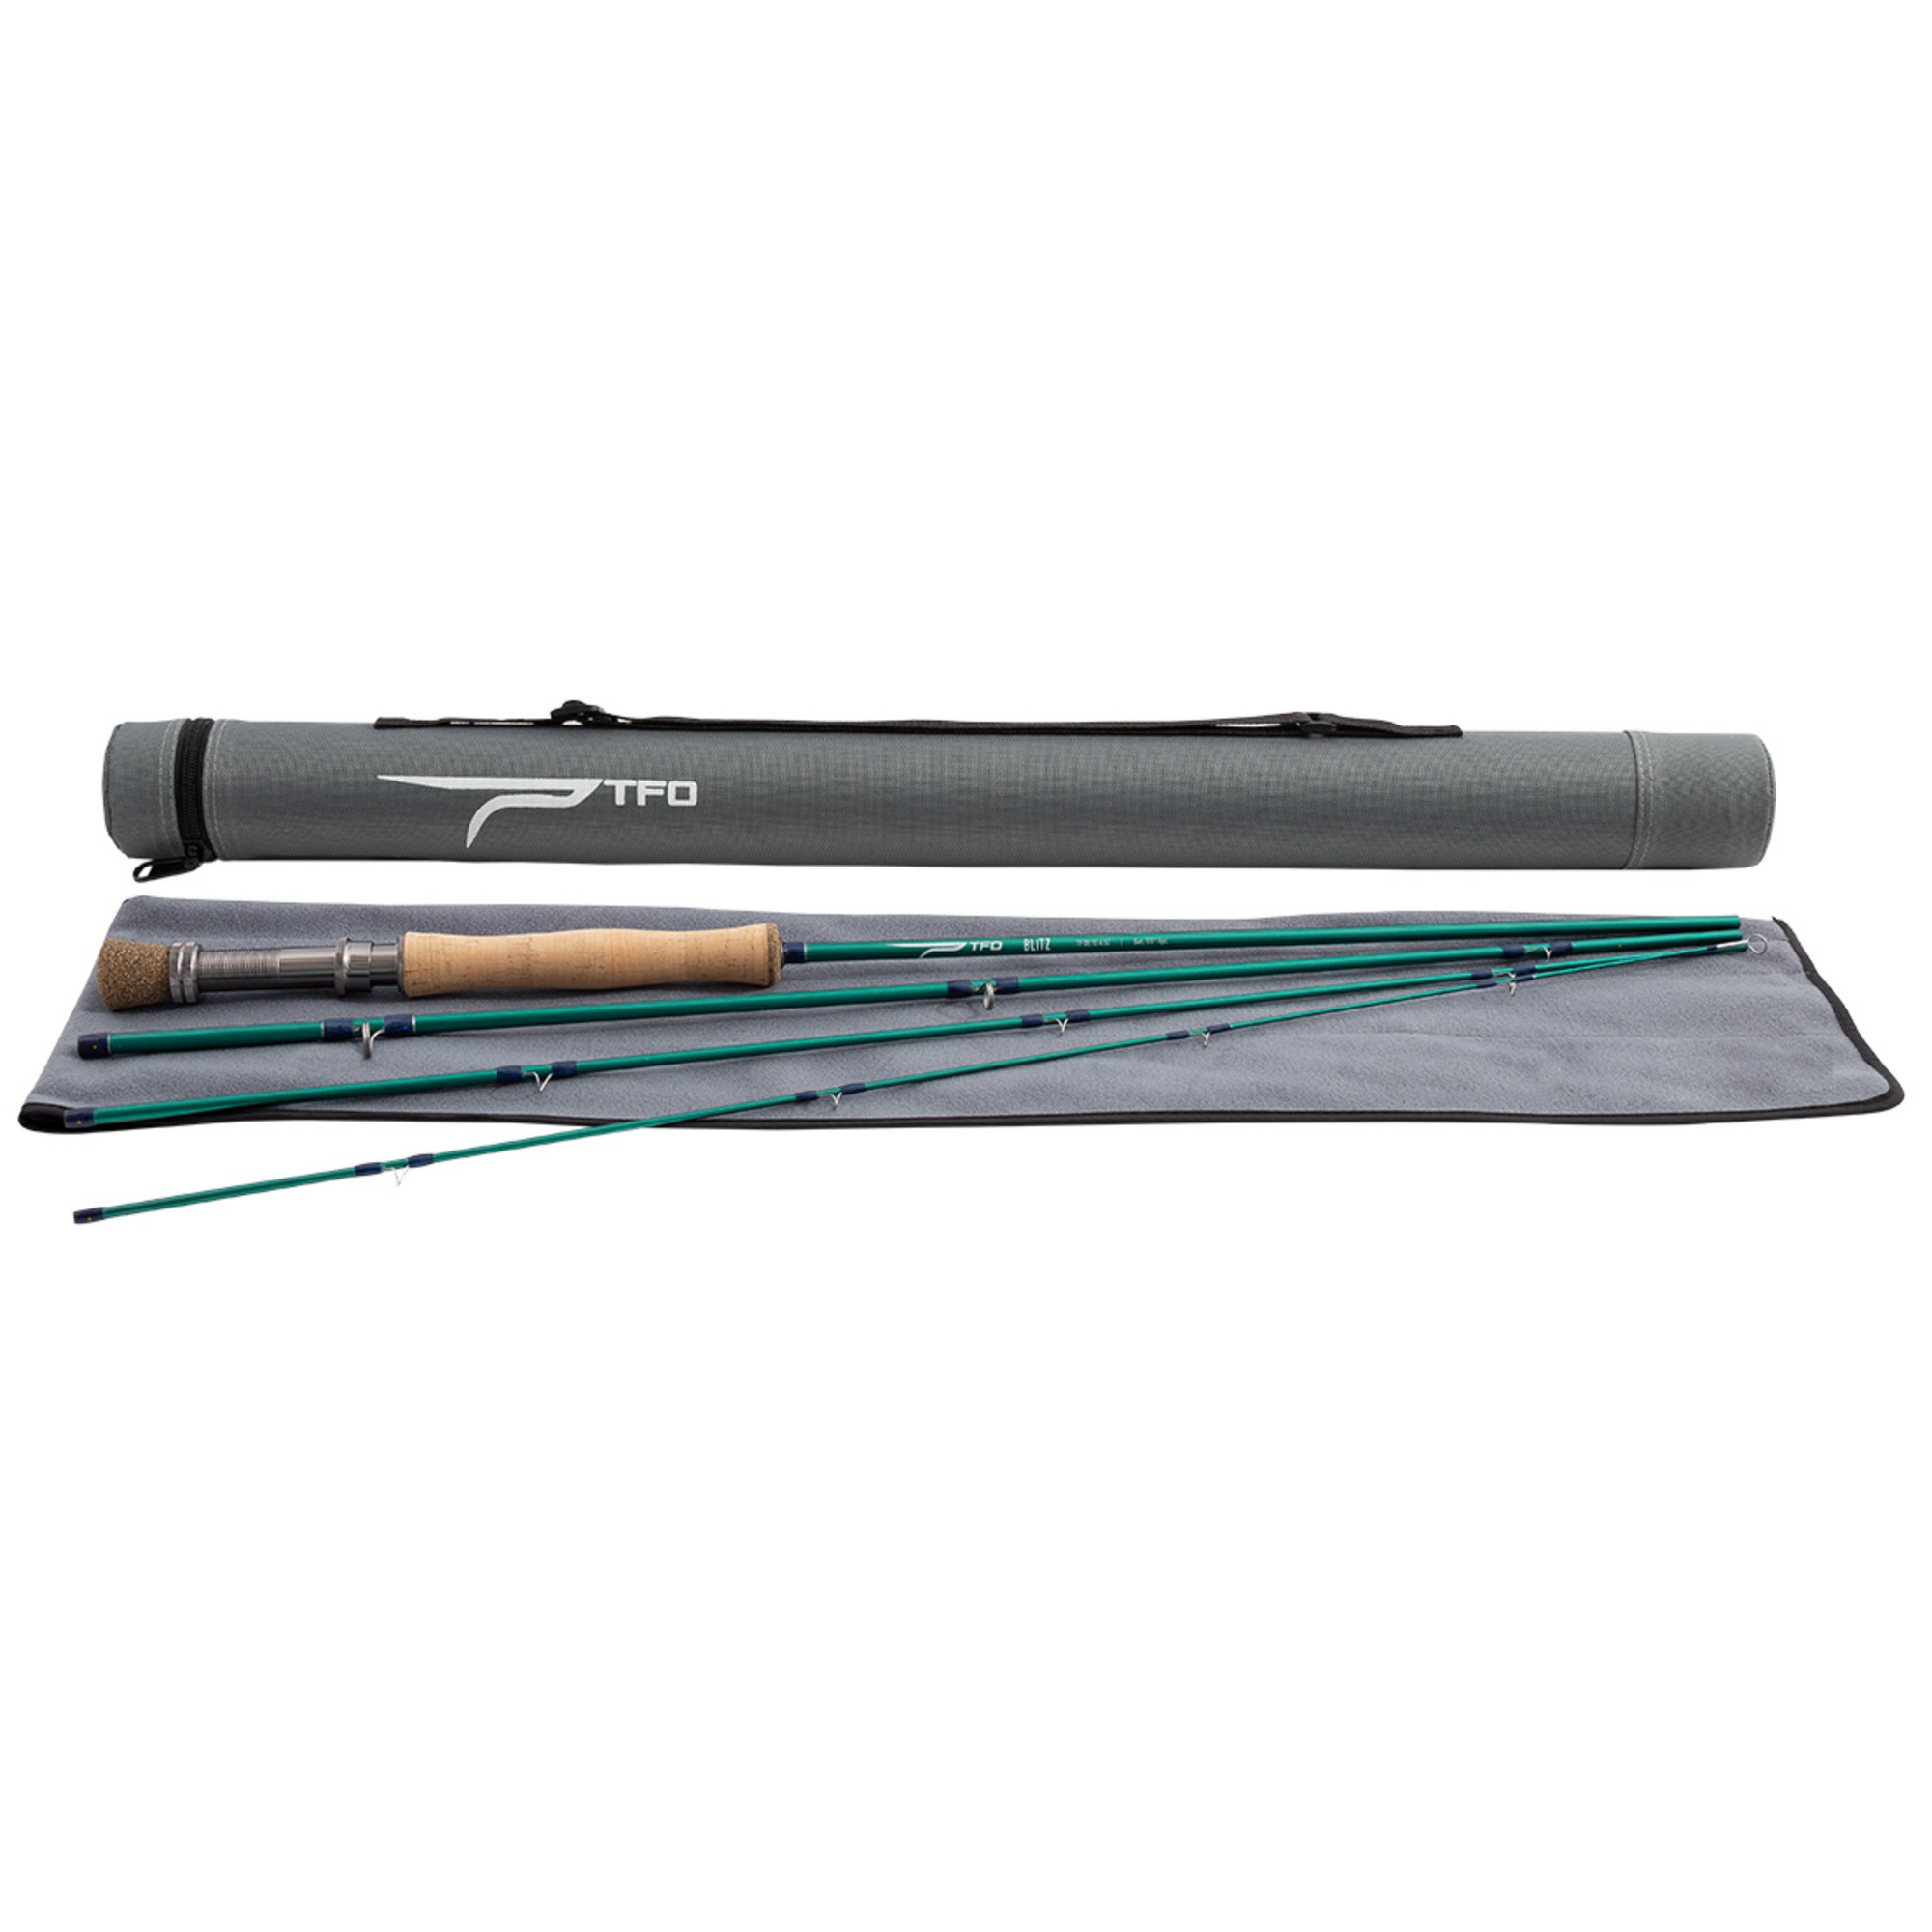 TFO Blitz Fly Rod Series, 44% OFF